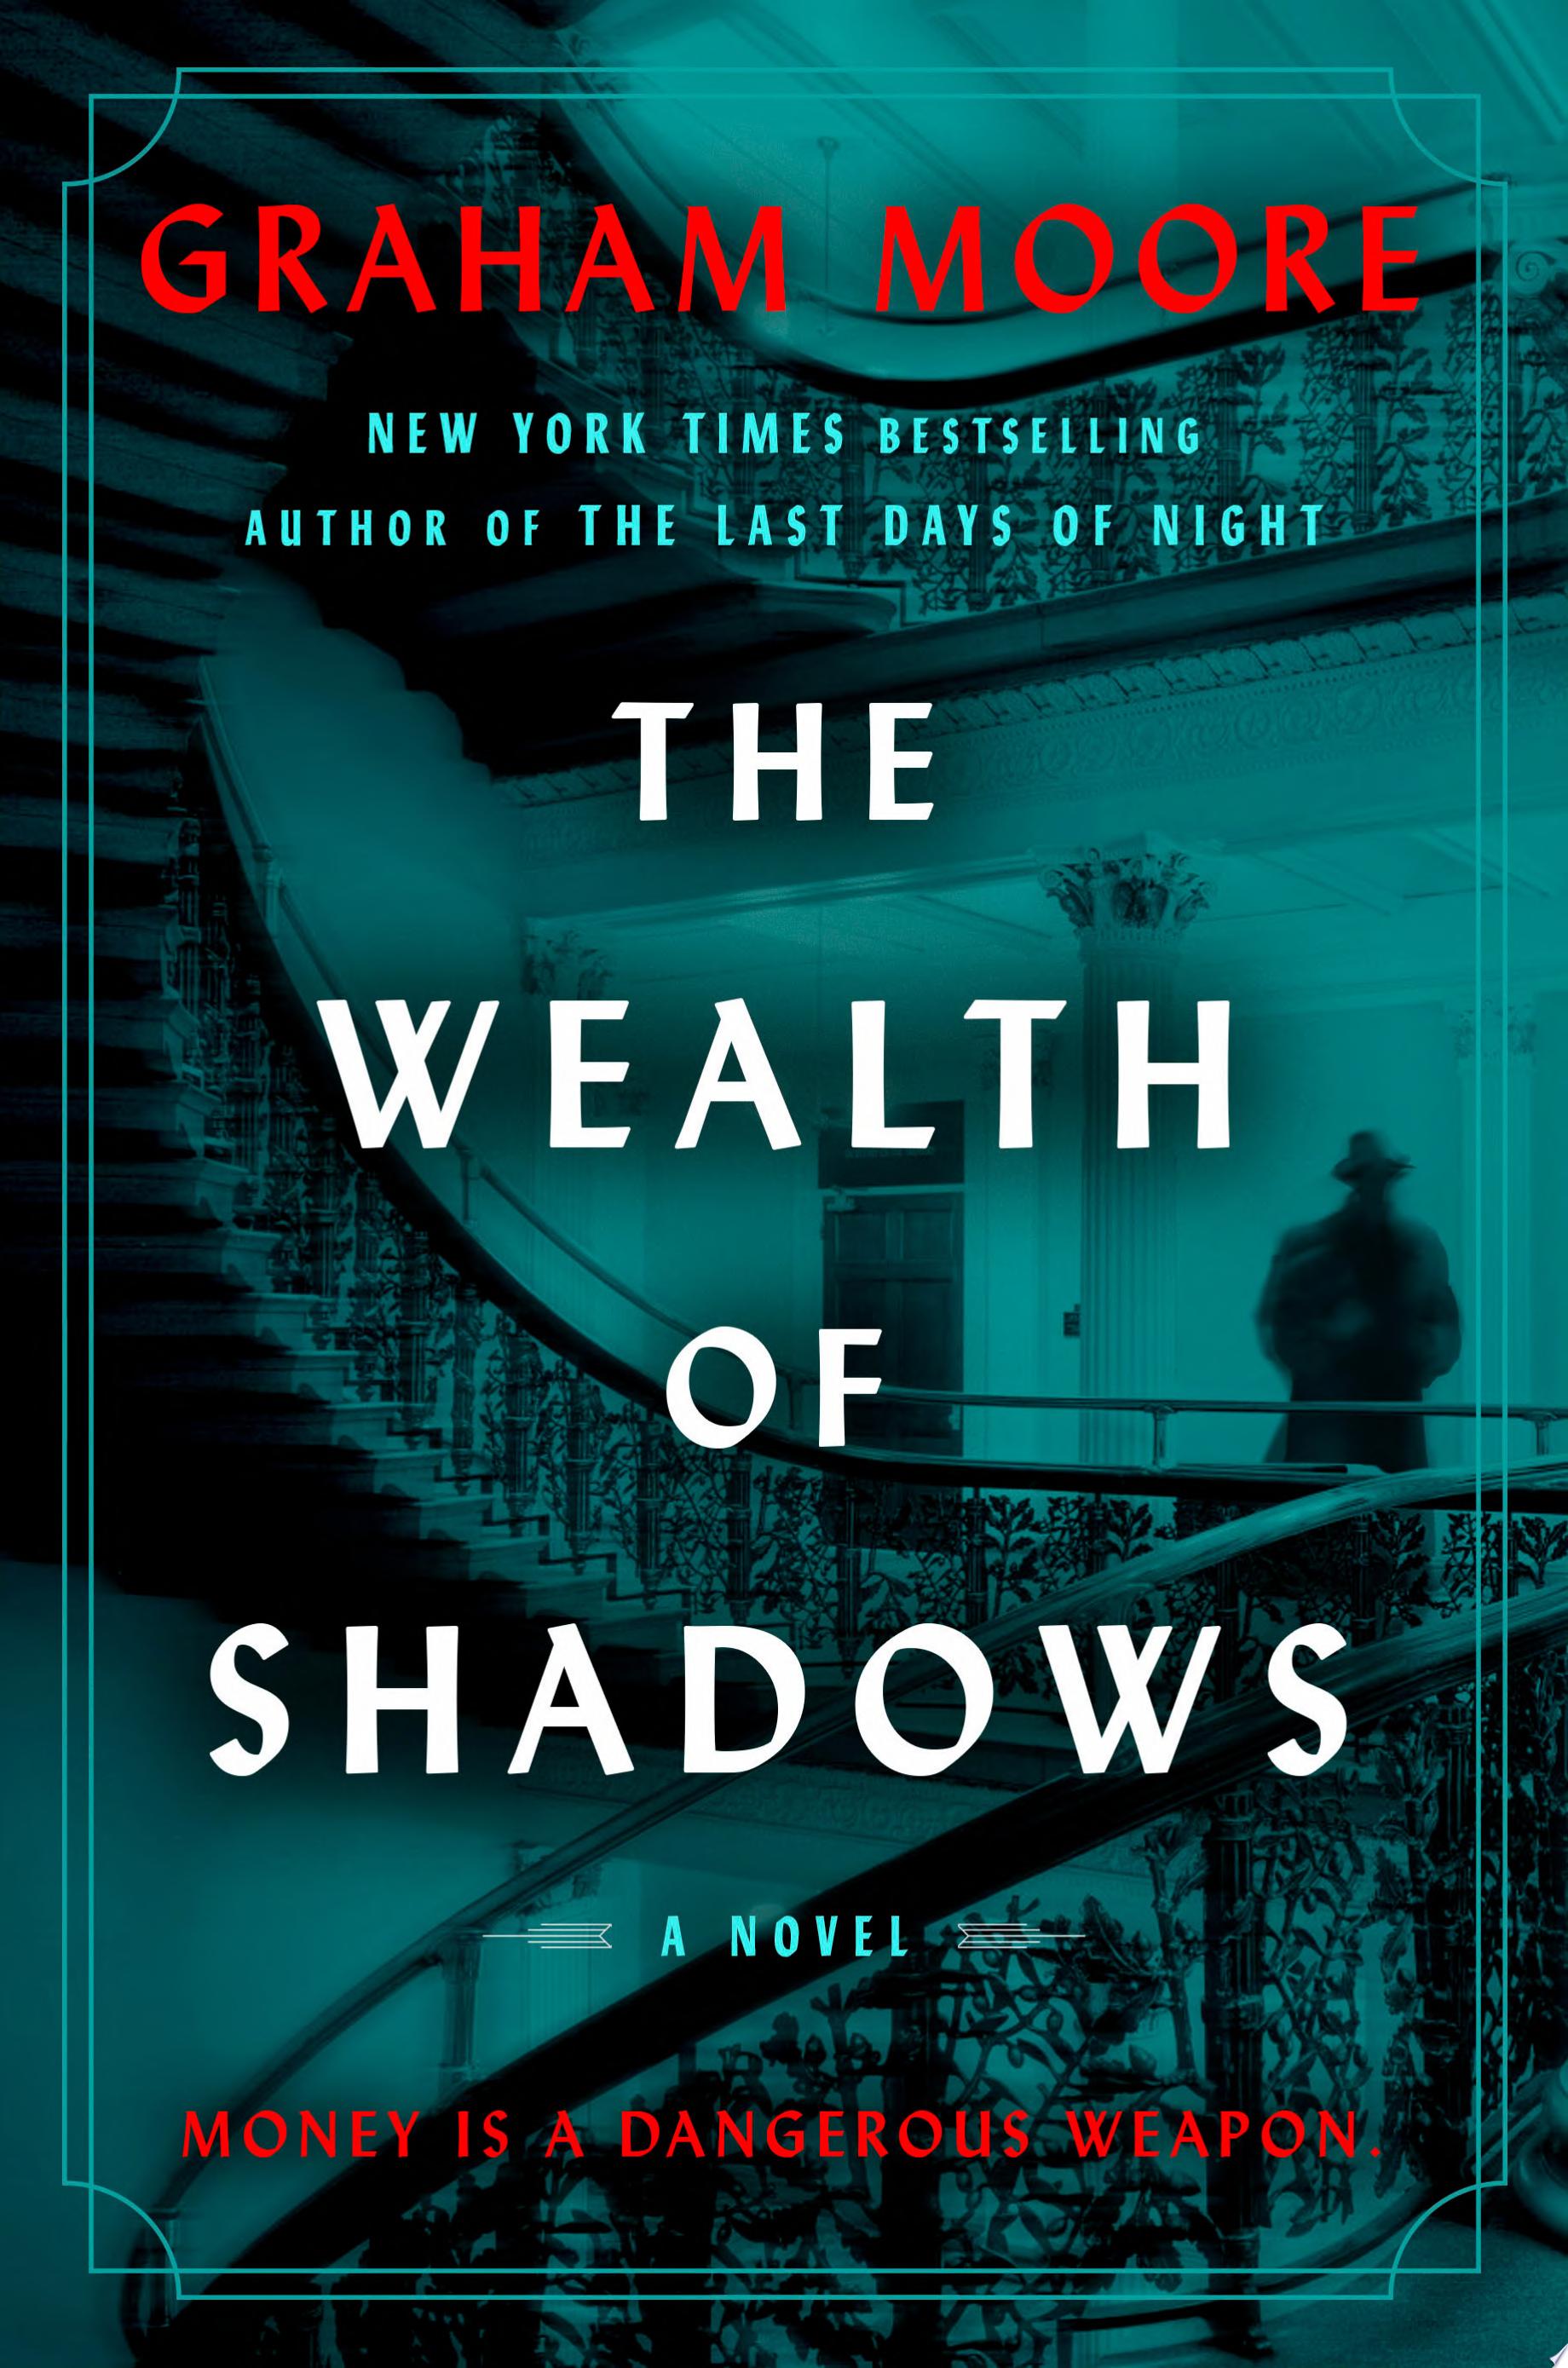 Image for "The Wealth of Shadows"